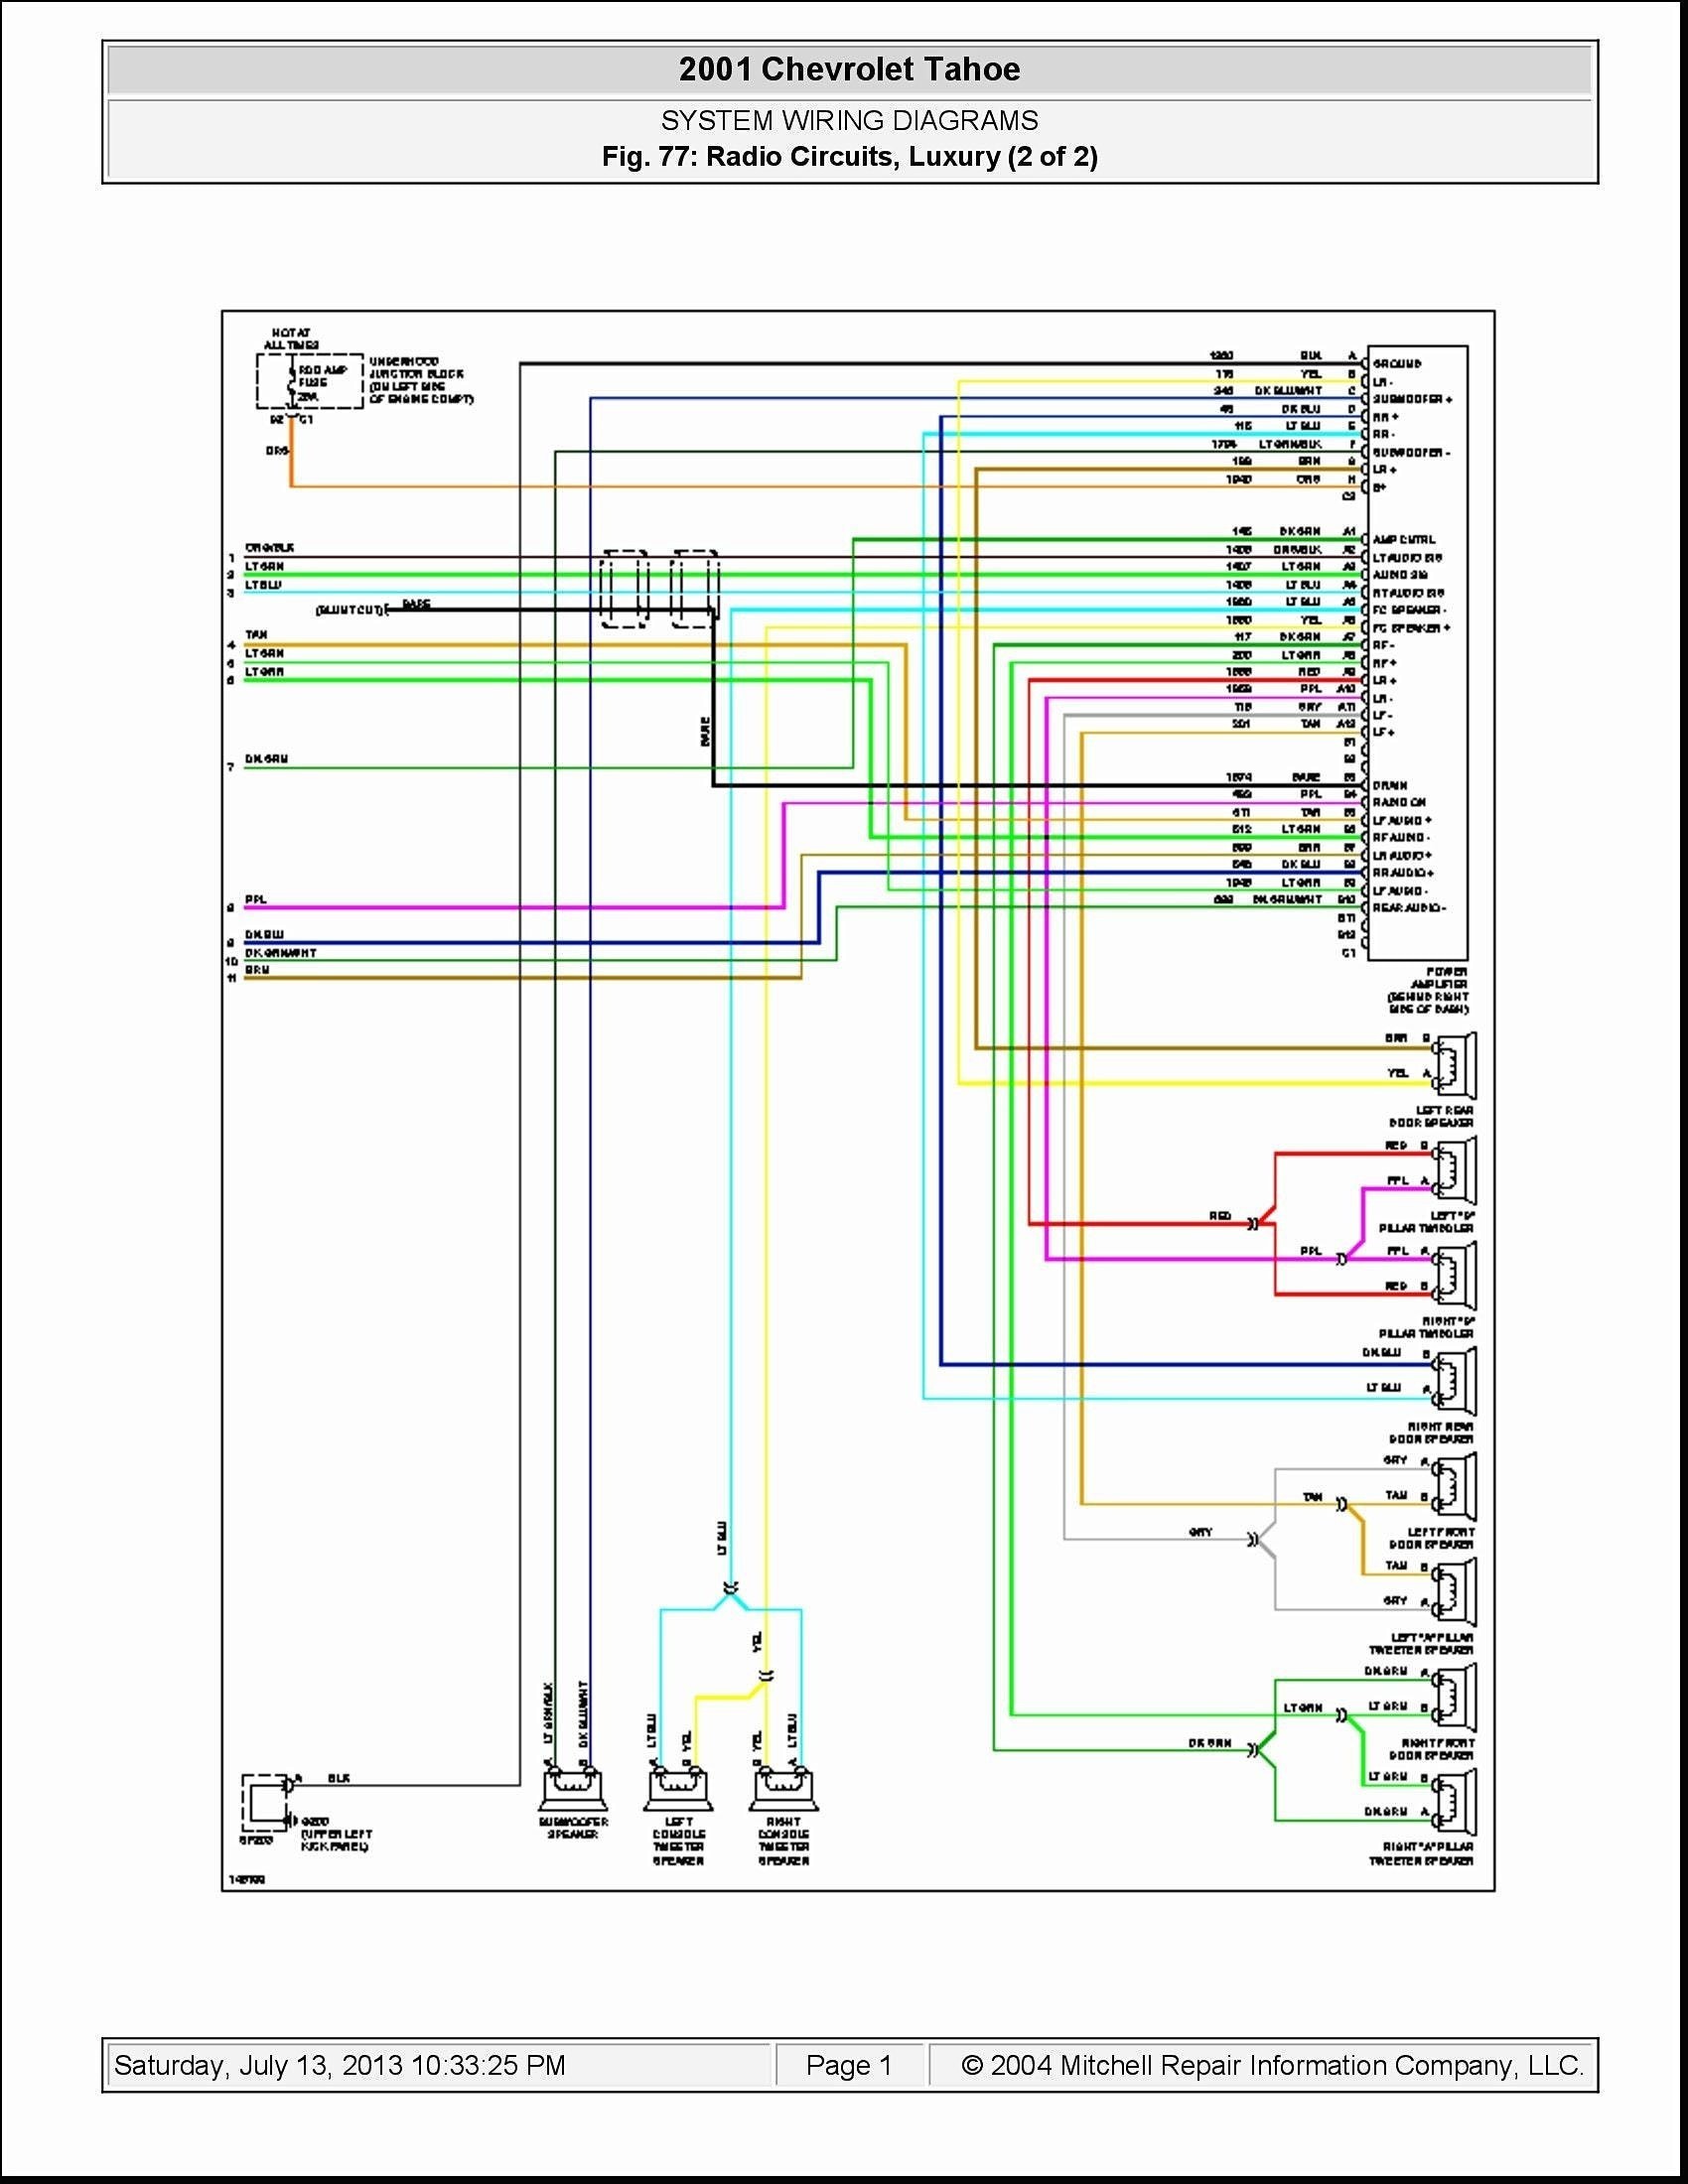 2003 Chevy Impala Stereo Wiring Diagram Unique New 2002 Chevy Impala Car Stereo Wiring Diagram 2005 Chevy